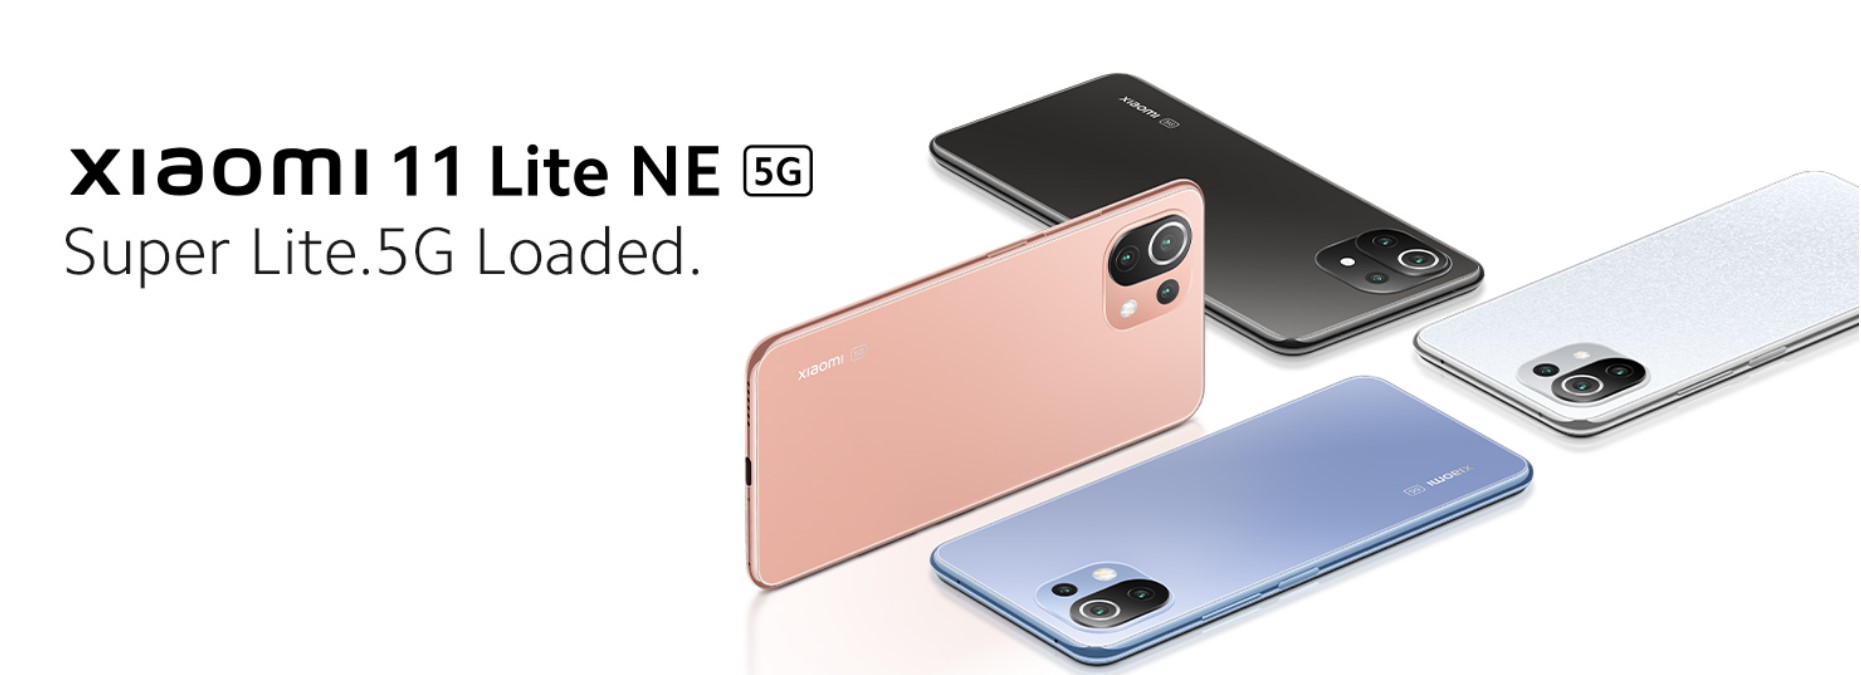 Xiaomi 11 Lite NE 5G - best %g mobile to buy for powerful performance